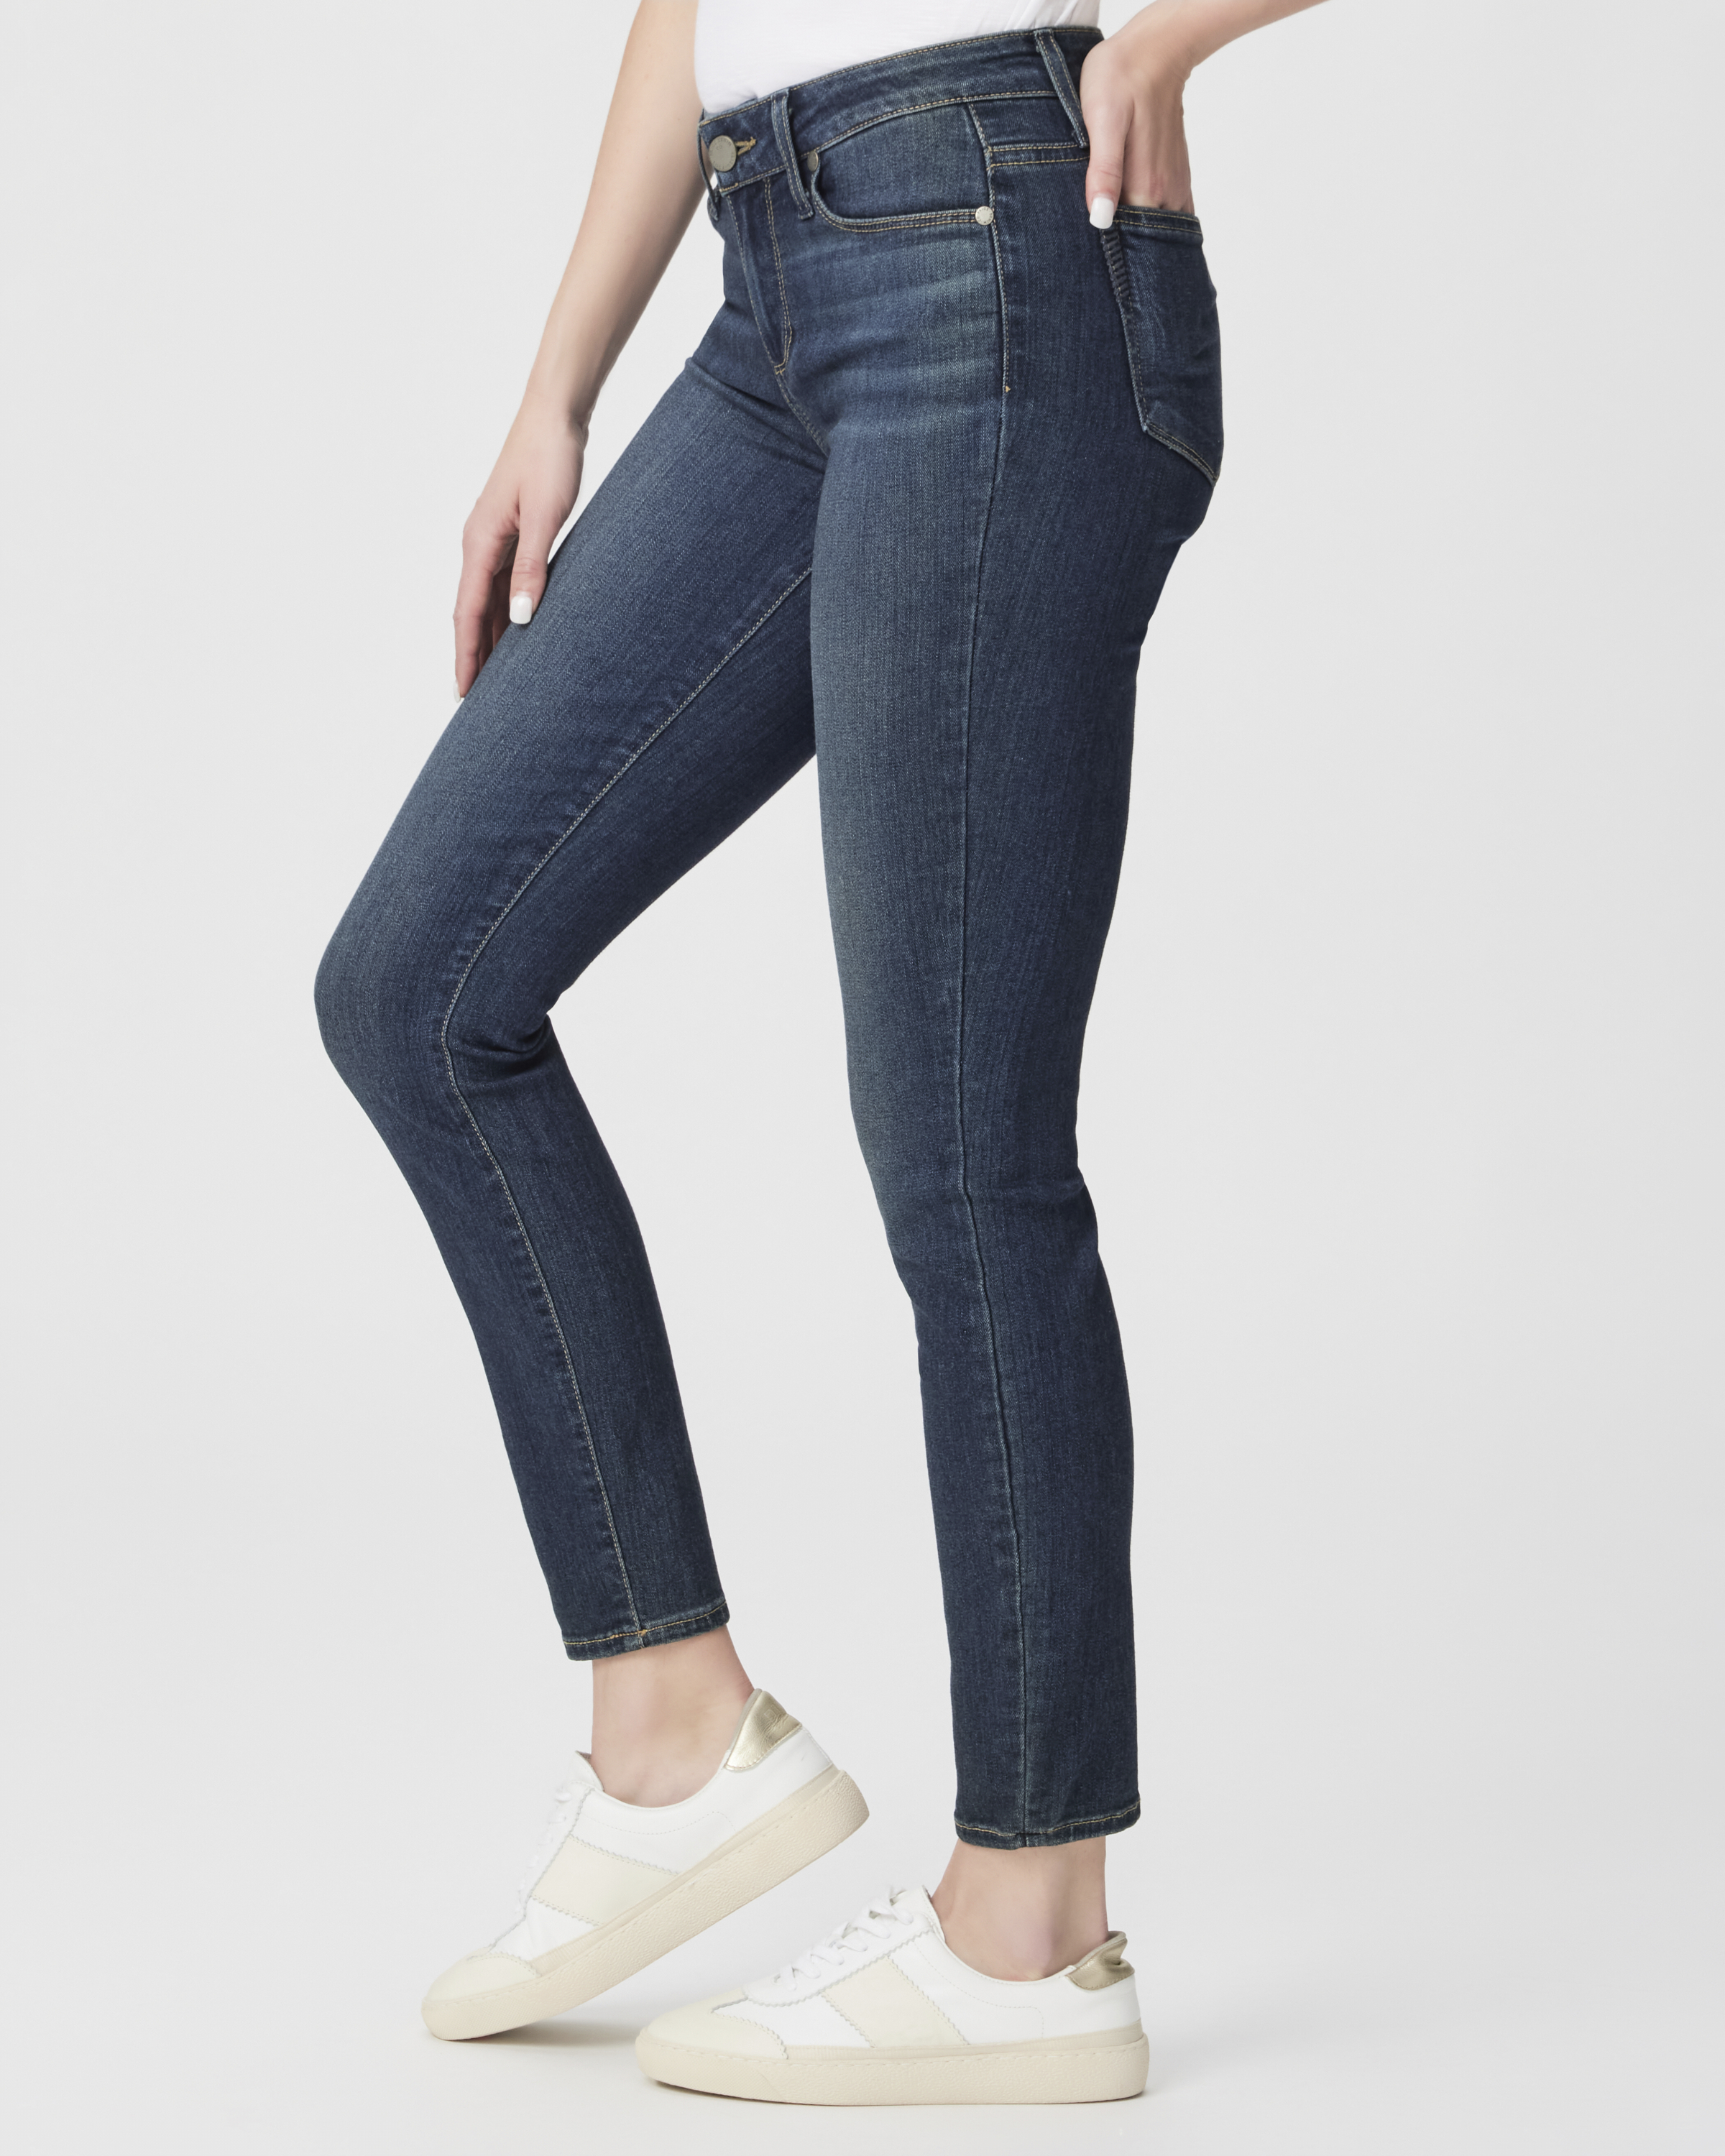 Paige 1844700-2544 Verdugo Ankle Mid-Rise Ultra Skinny Ultra White Jeans $189 